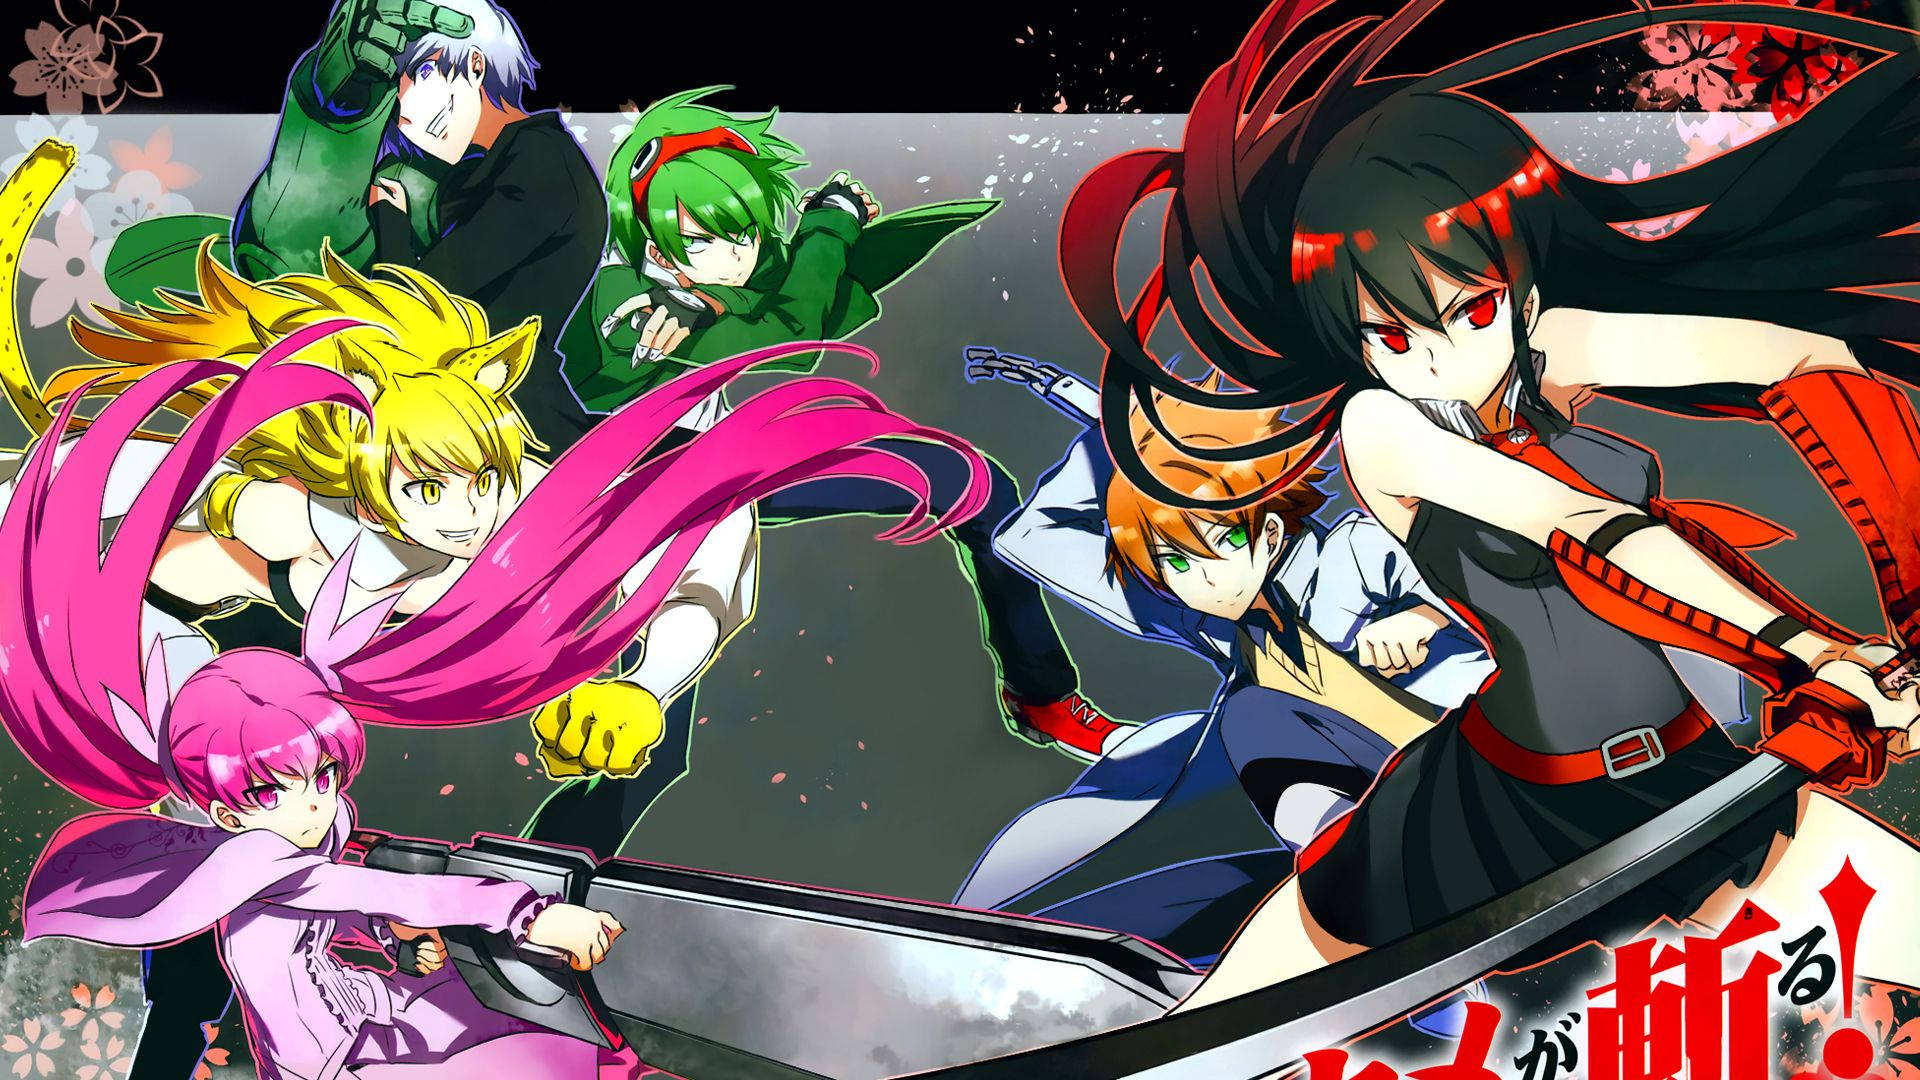 Fight Against Injustice with Akame Ga Kill Wallpaper